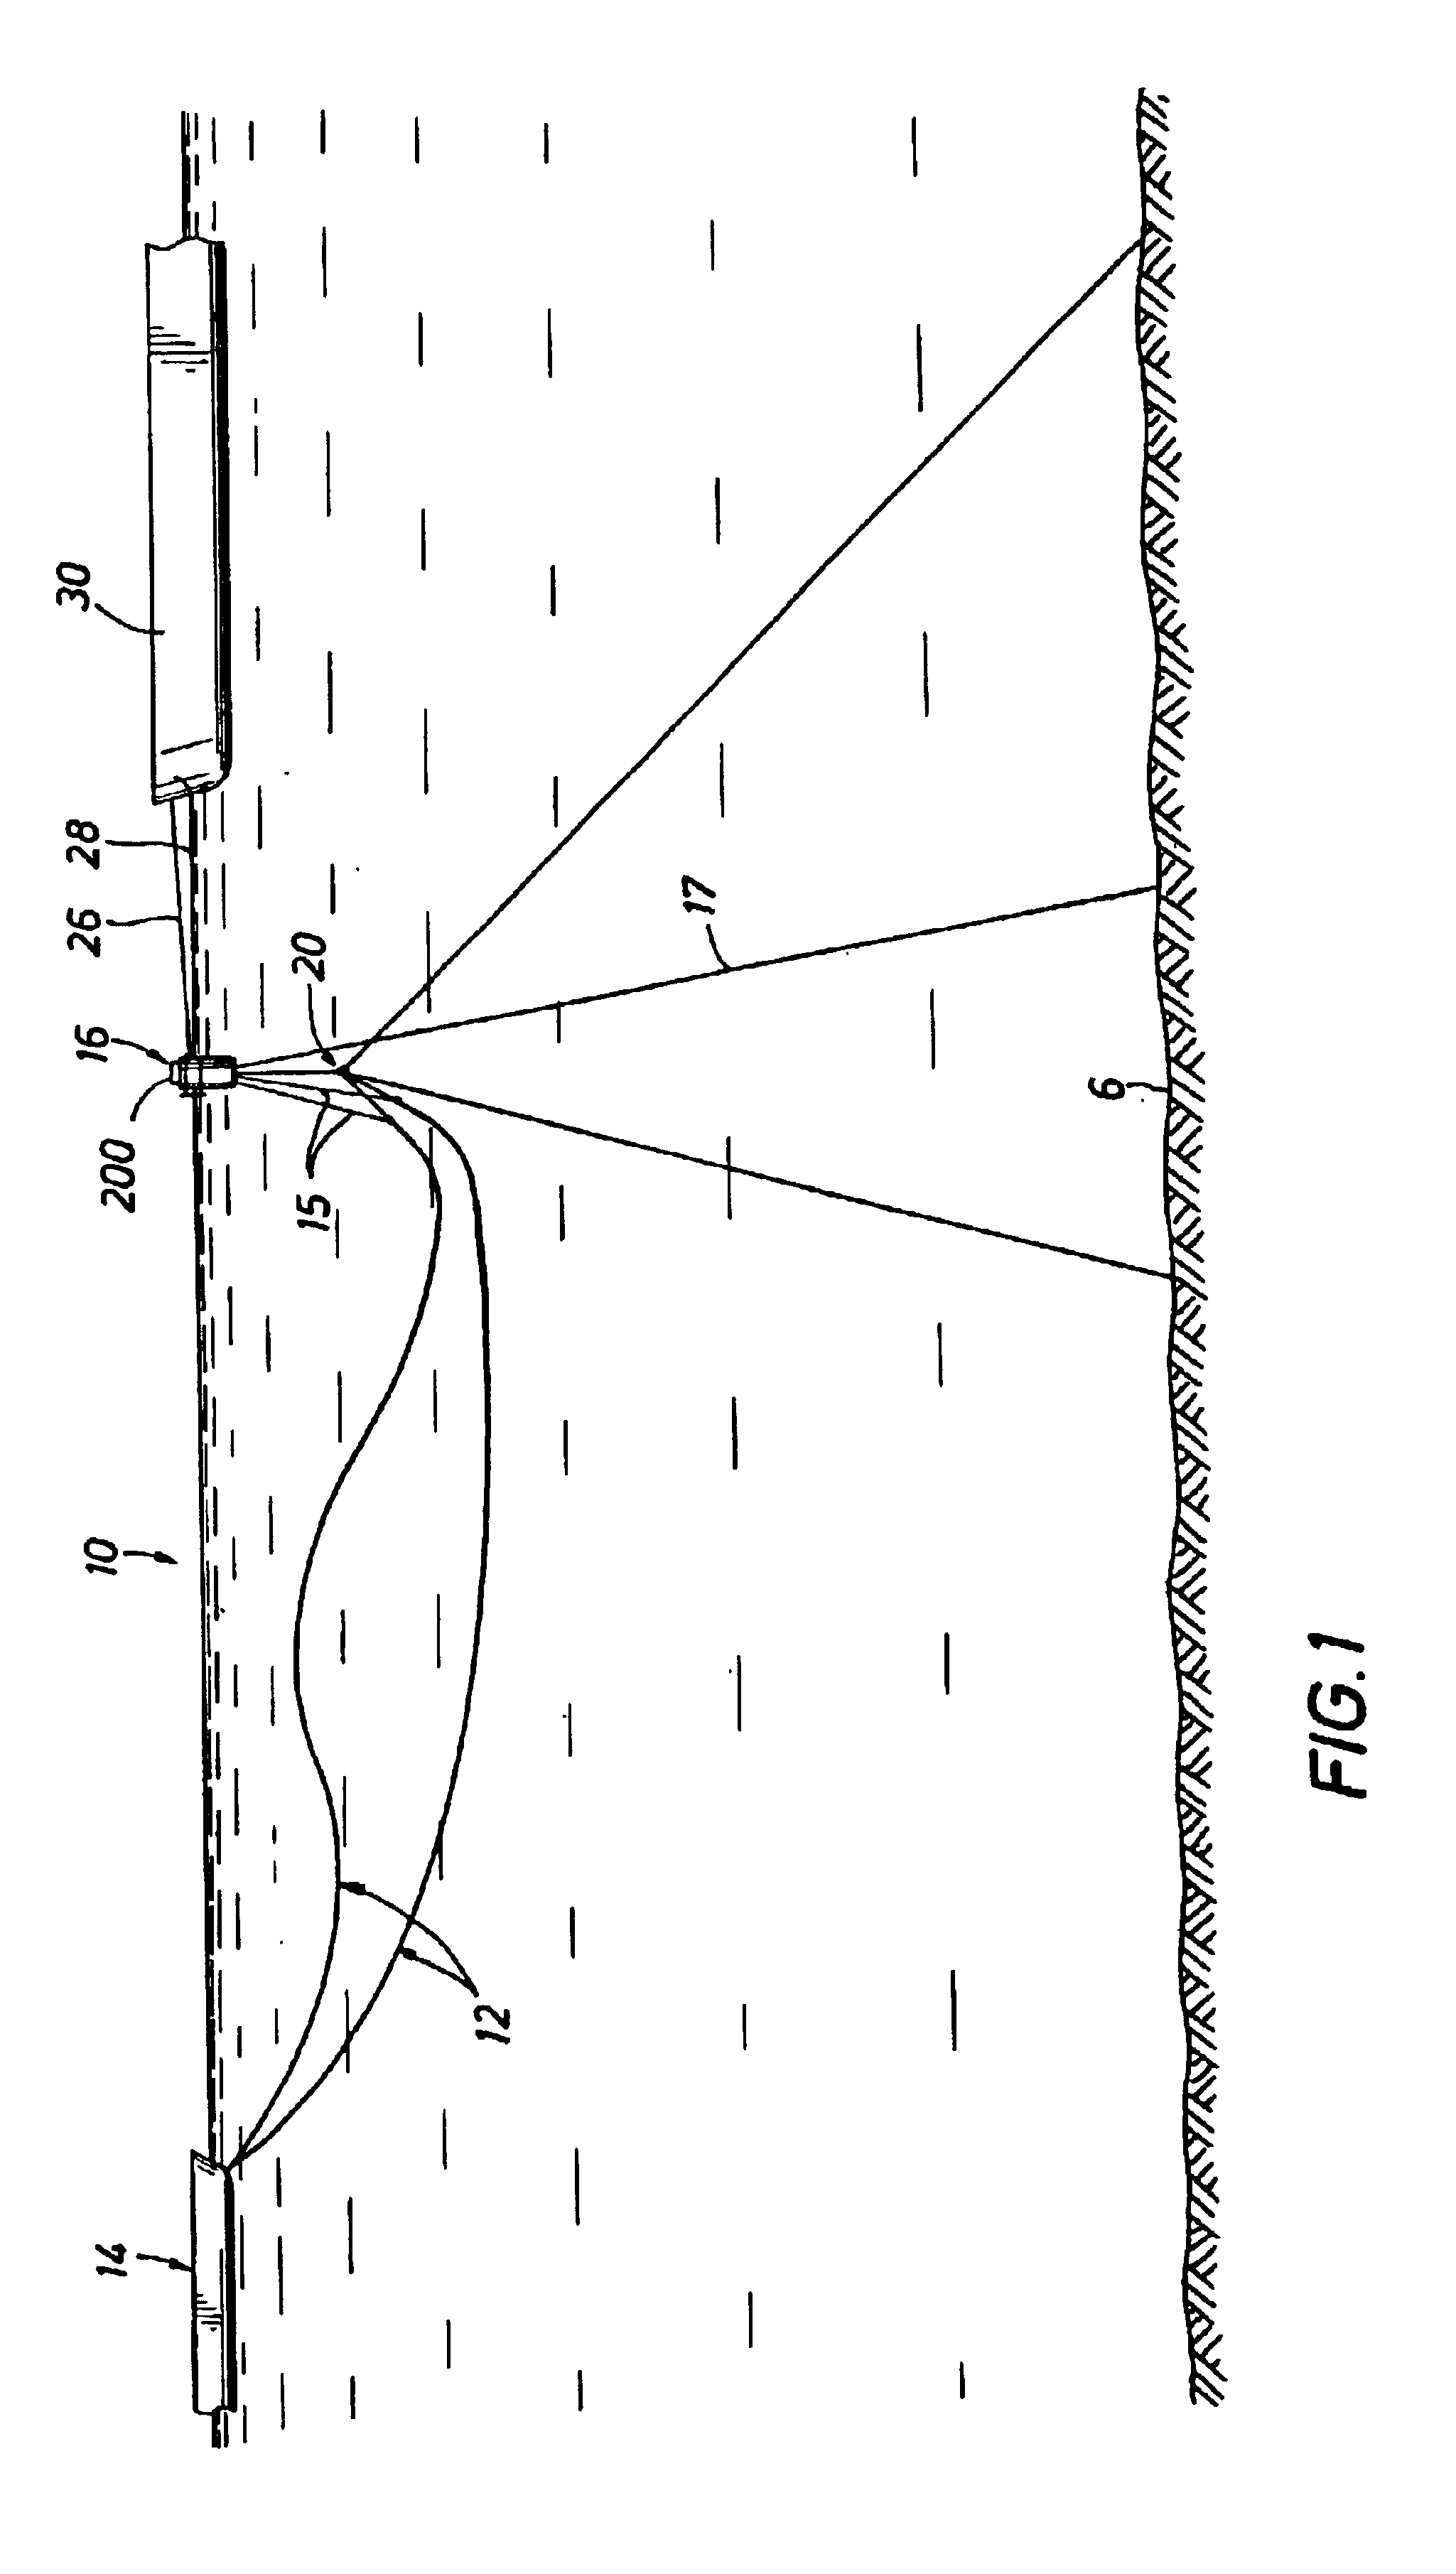 Submerged flowline termination at a single point mooring buoy